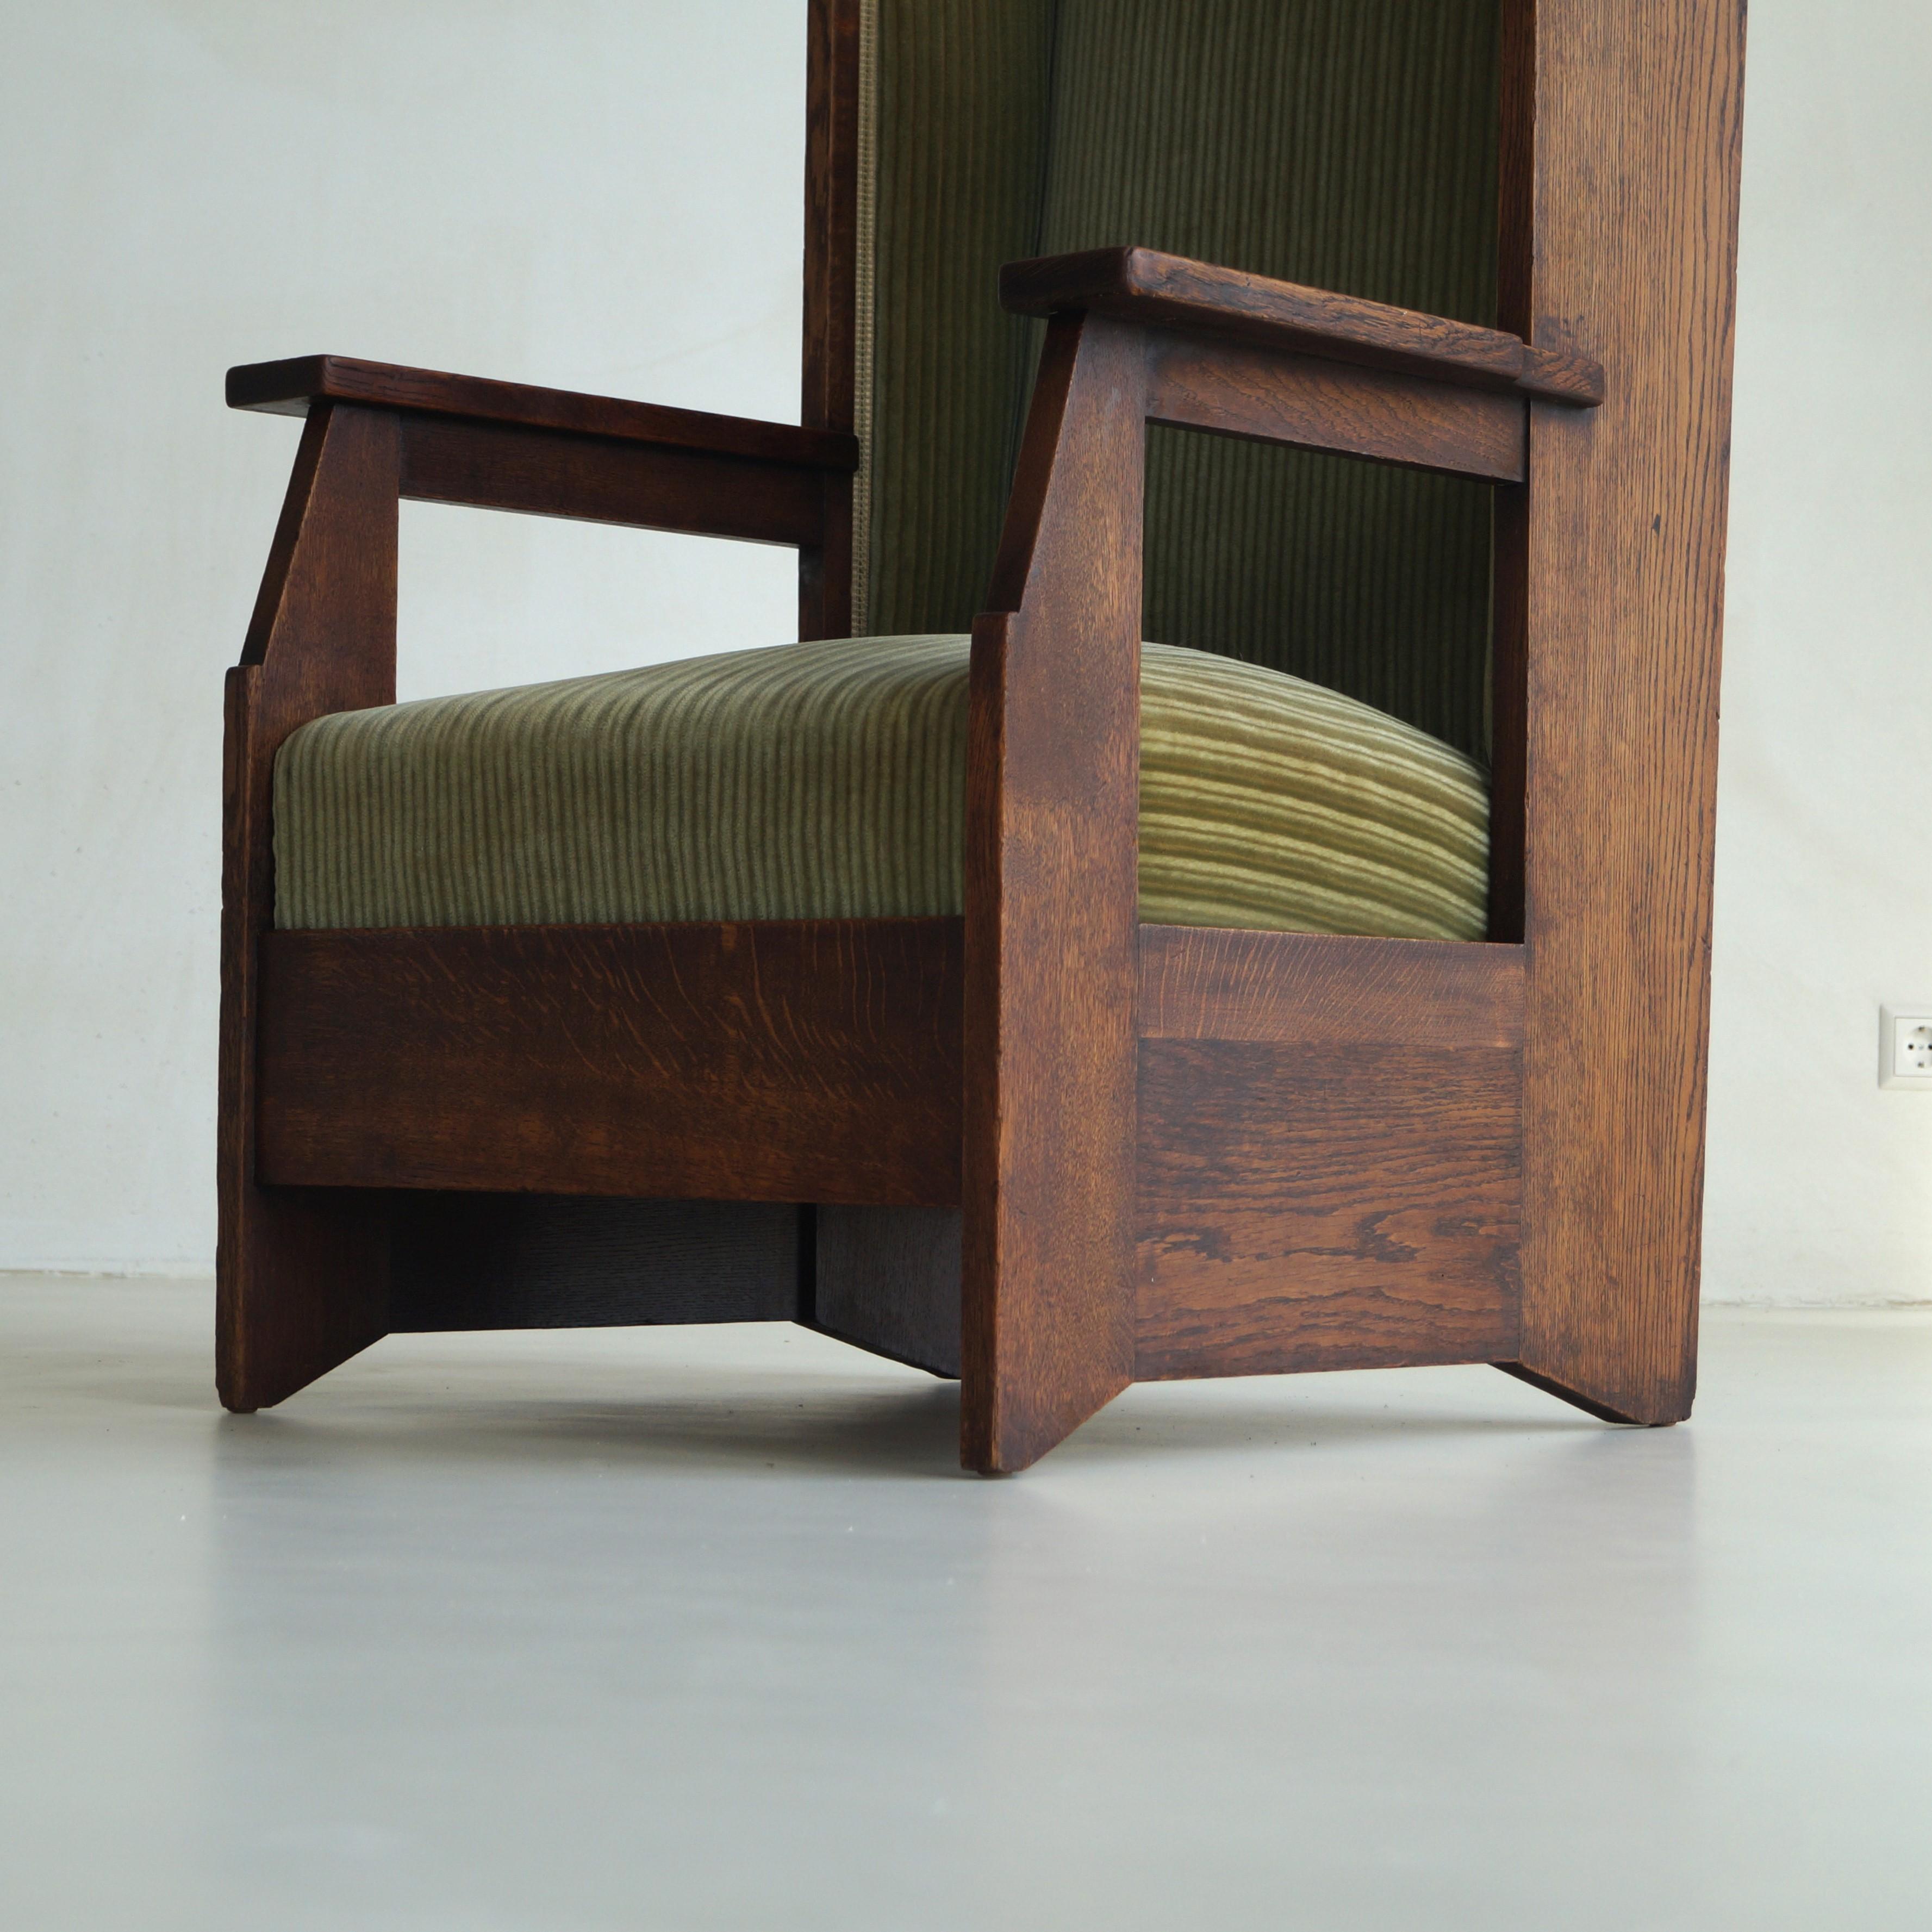 Dutch Art Deco Haagse School high back chair by Hendrik Wouda for Pander, 1924 For Sale 6